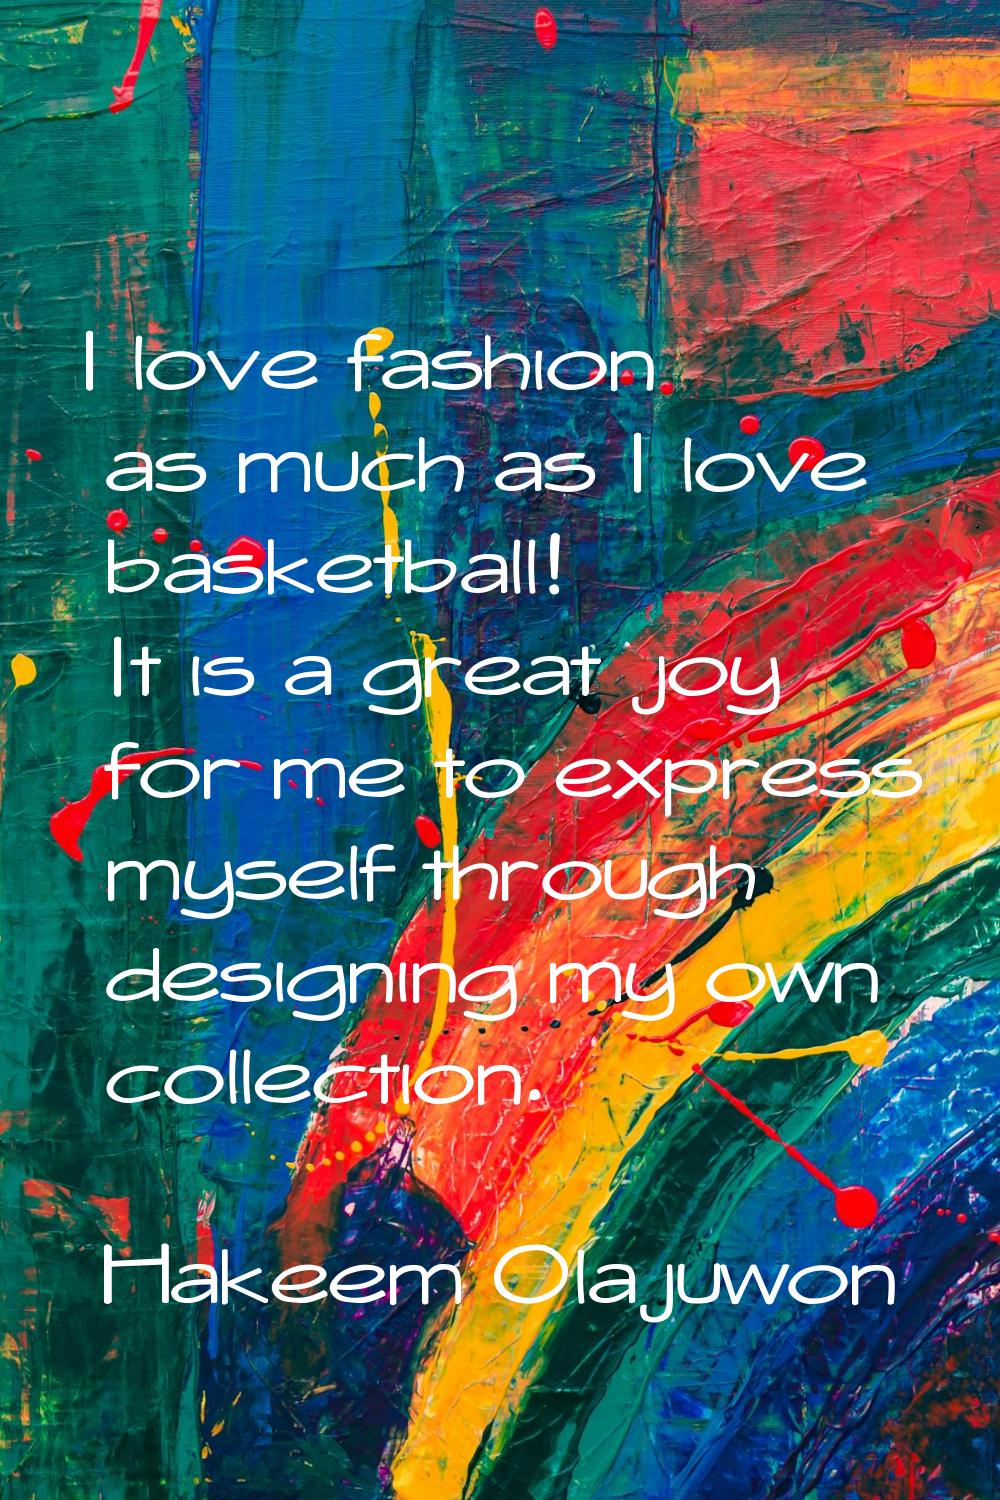 I love fashion as much as I love basketball! It is a great joy for me to express myself through des